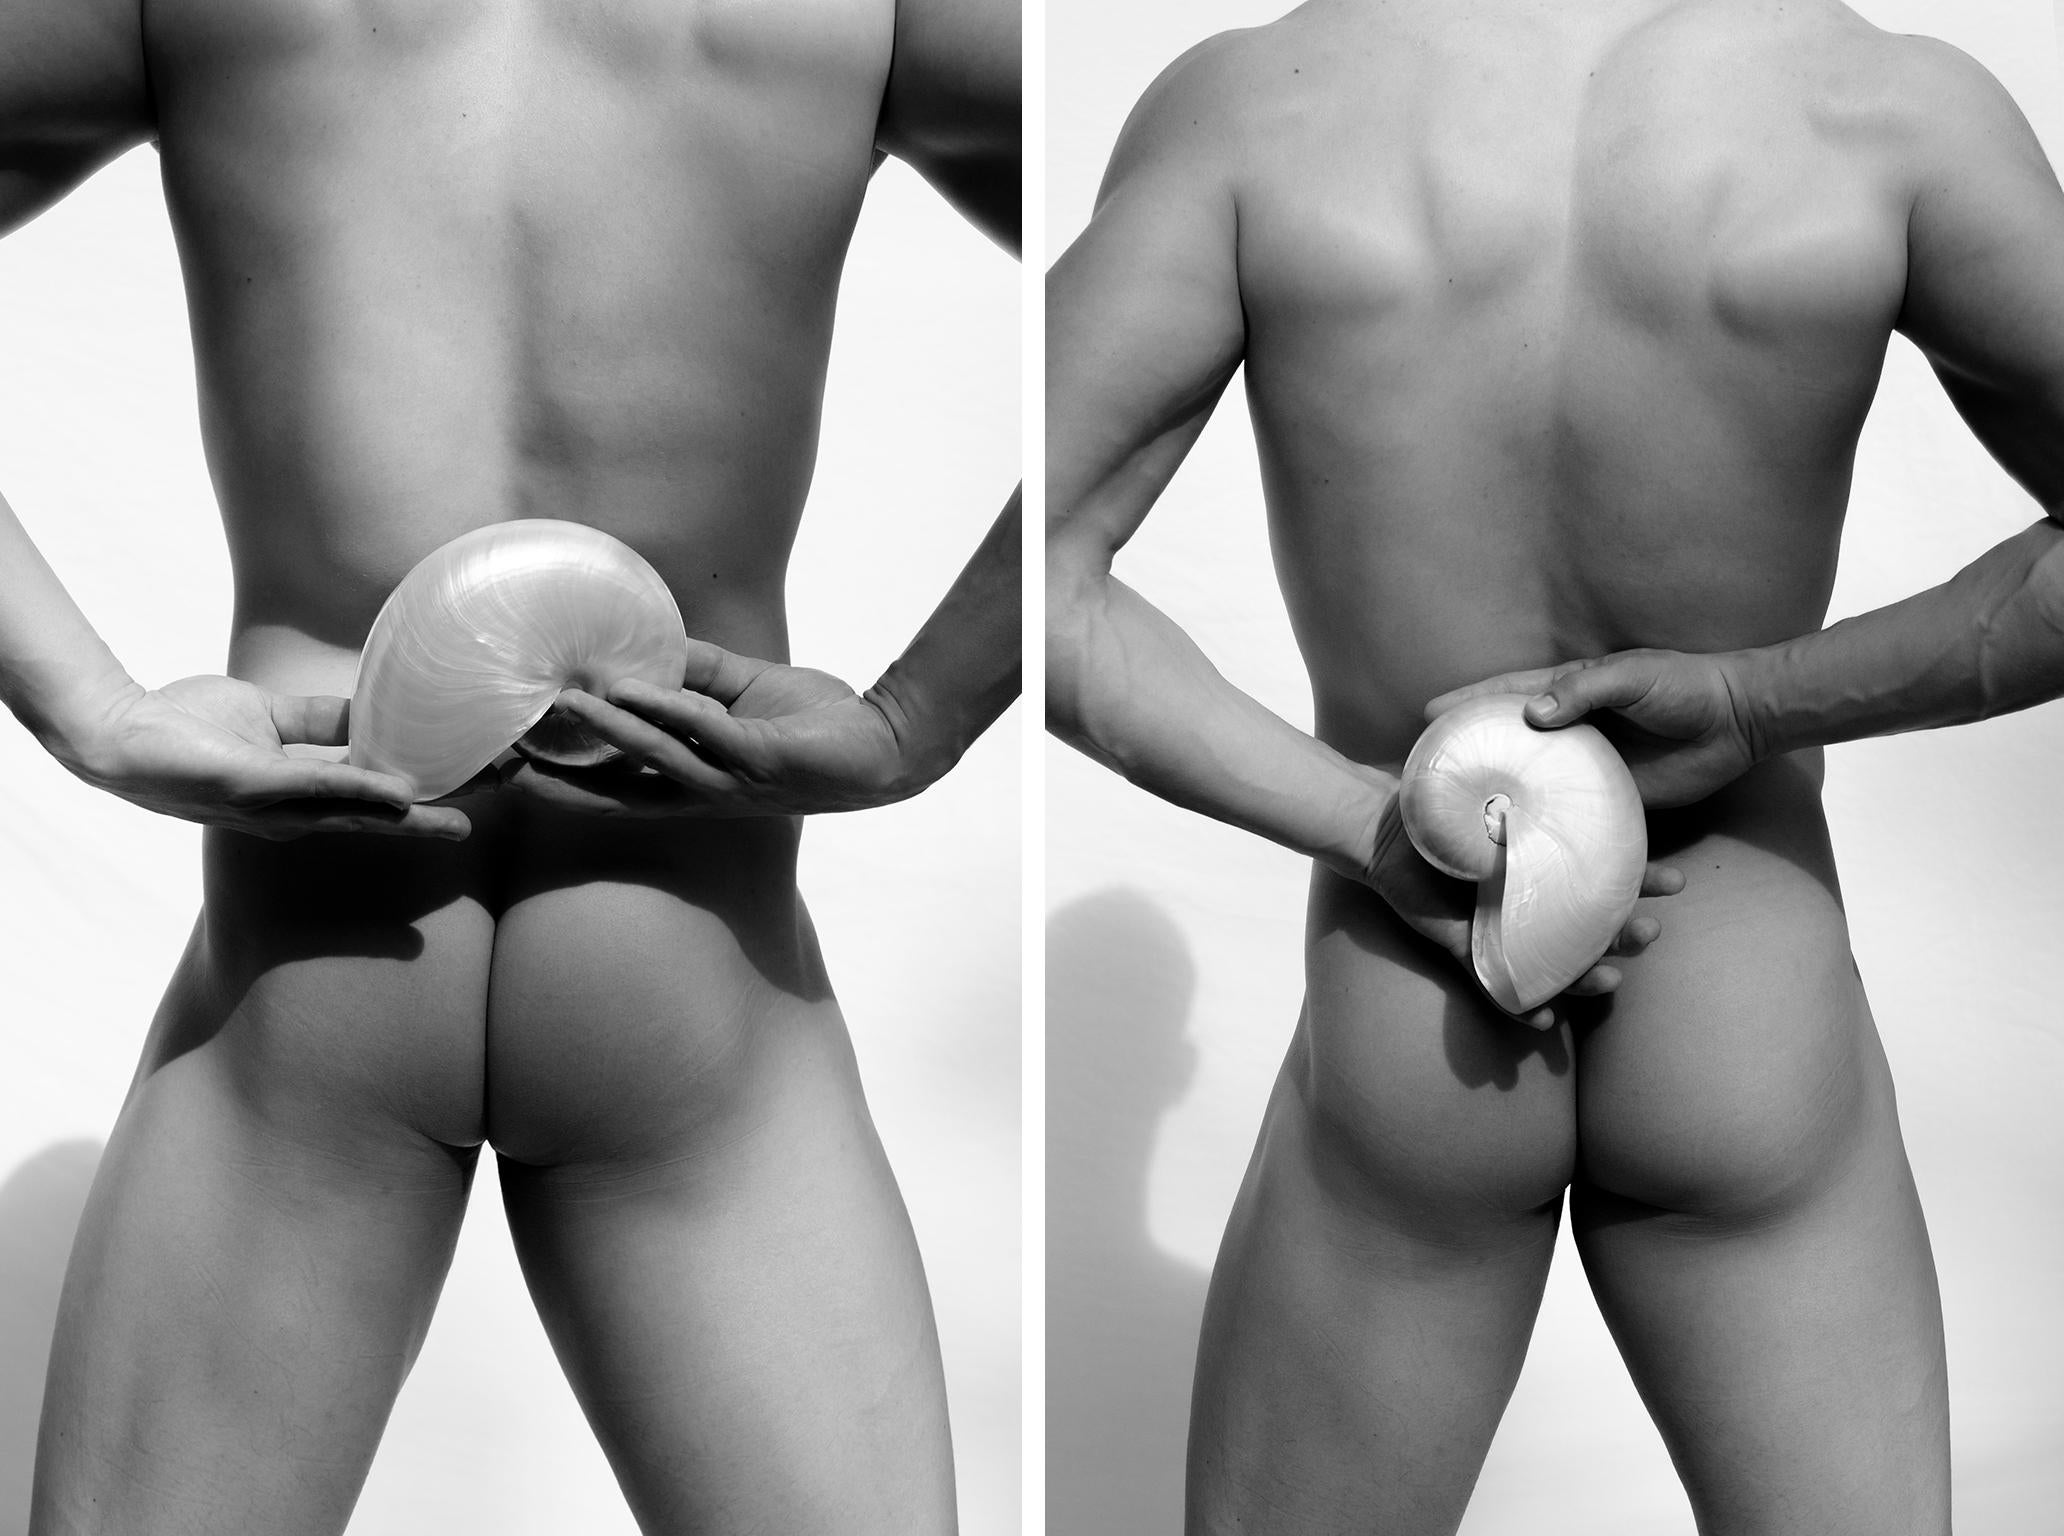 Ricky Cohete Nude Photograph - Espiral Dos & Espiral. Diptych. Male Nudes. Black and White Photographs